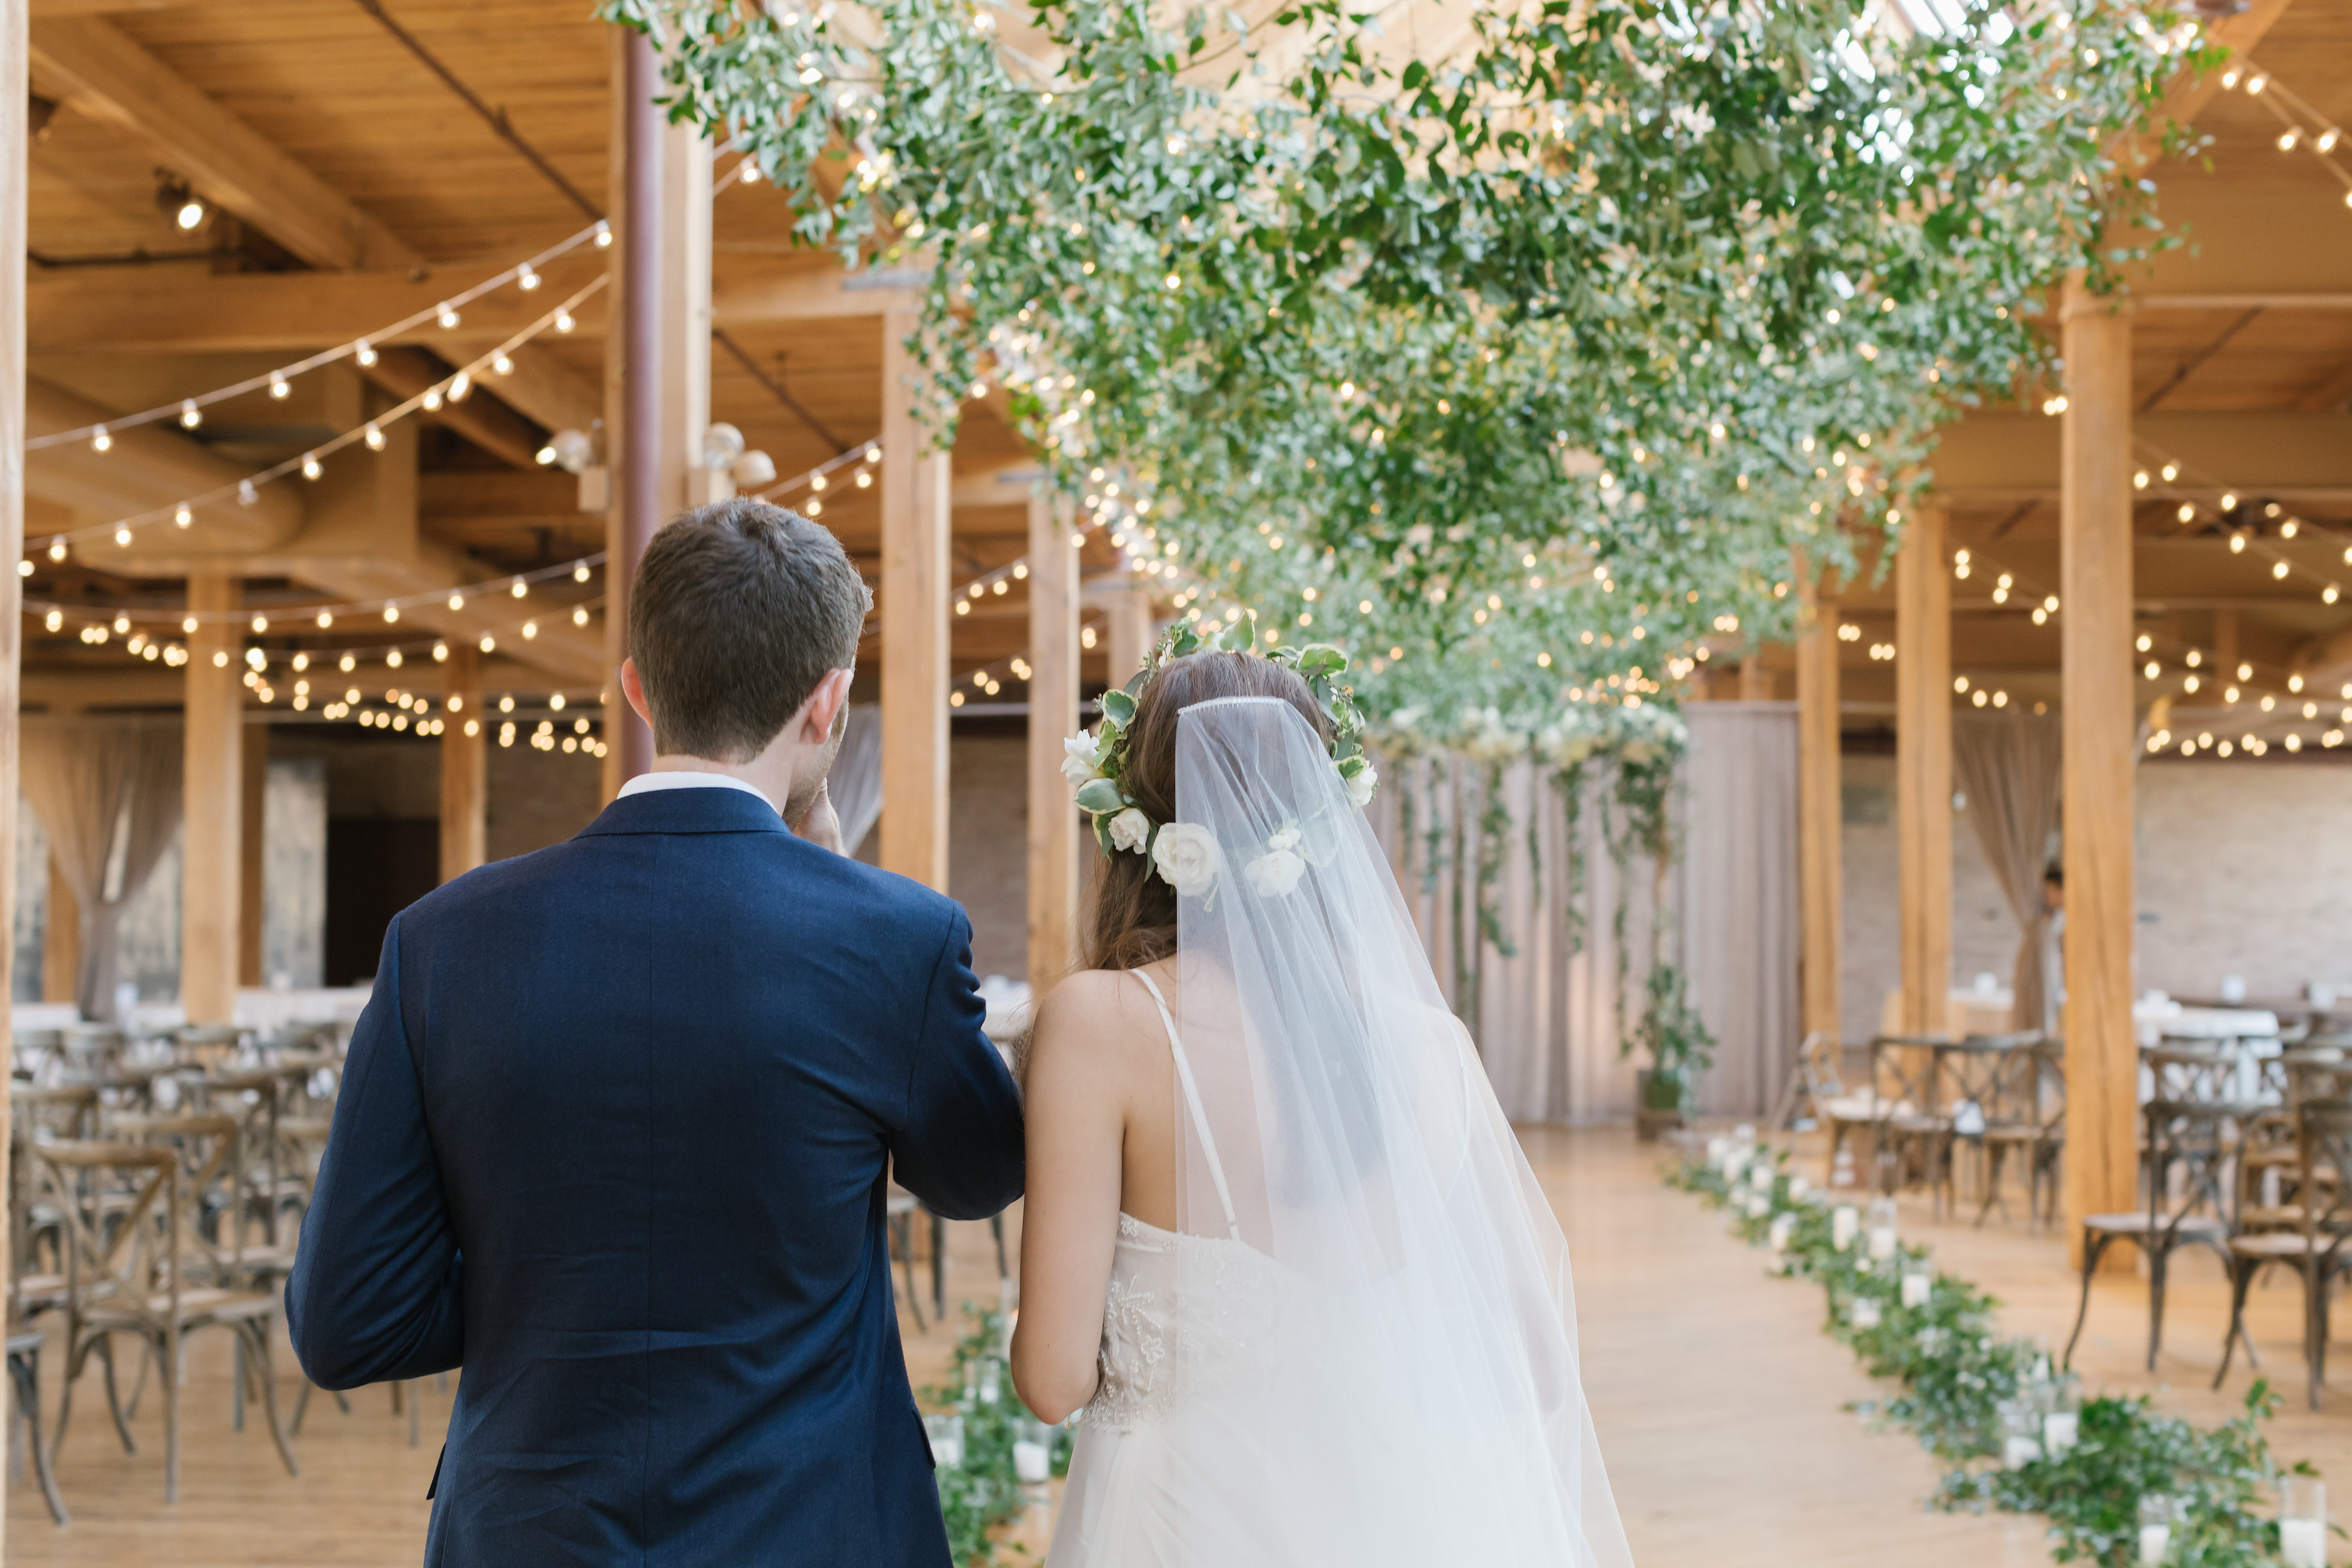 Greenery & Cafe Glove Lights down center aisle + N & South sides with Greenery Arch